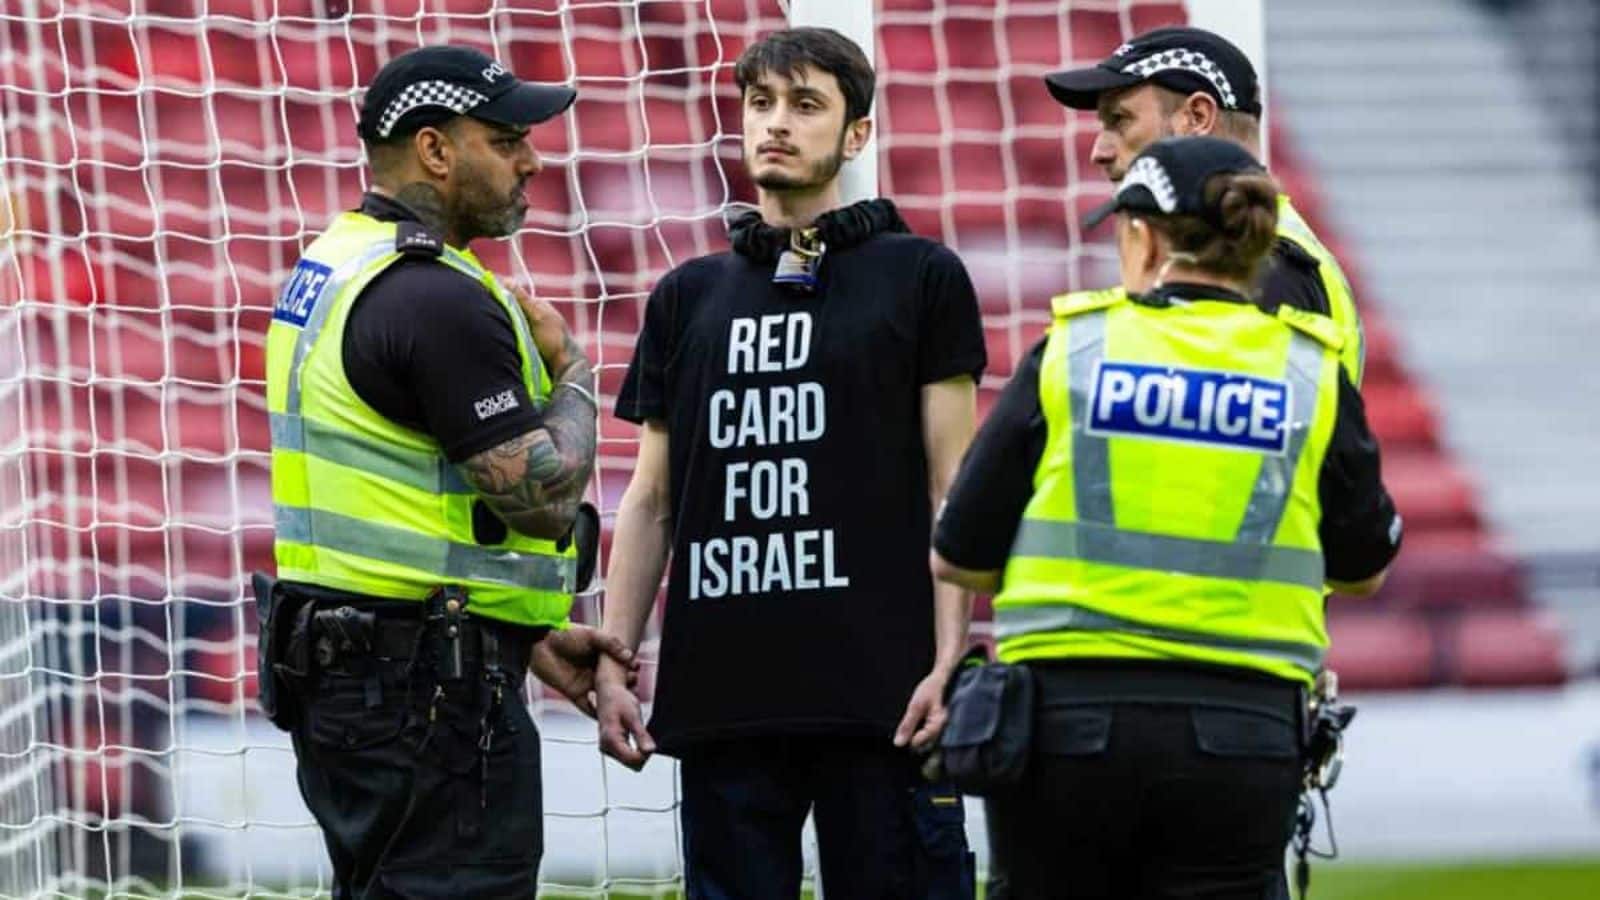 Pro-Palestine protester chains himself to goalposts at Euro qualifier match 